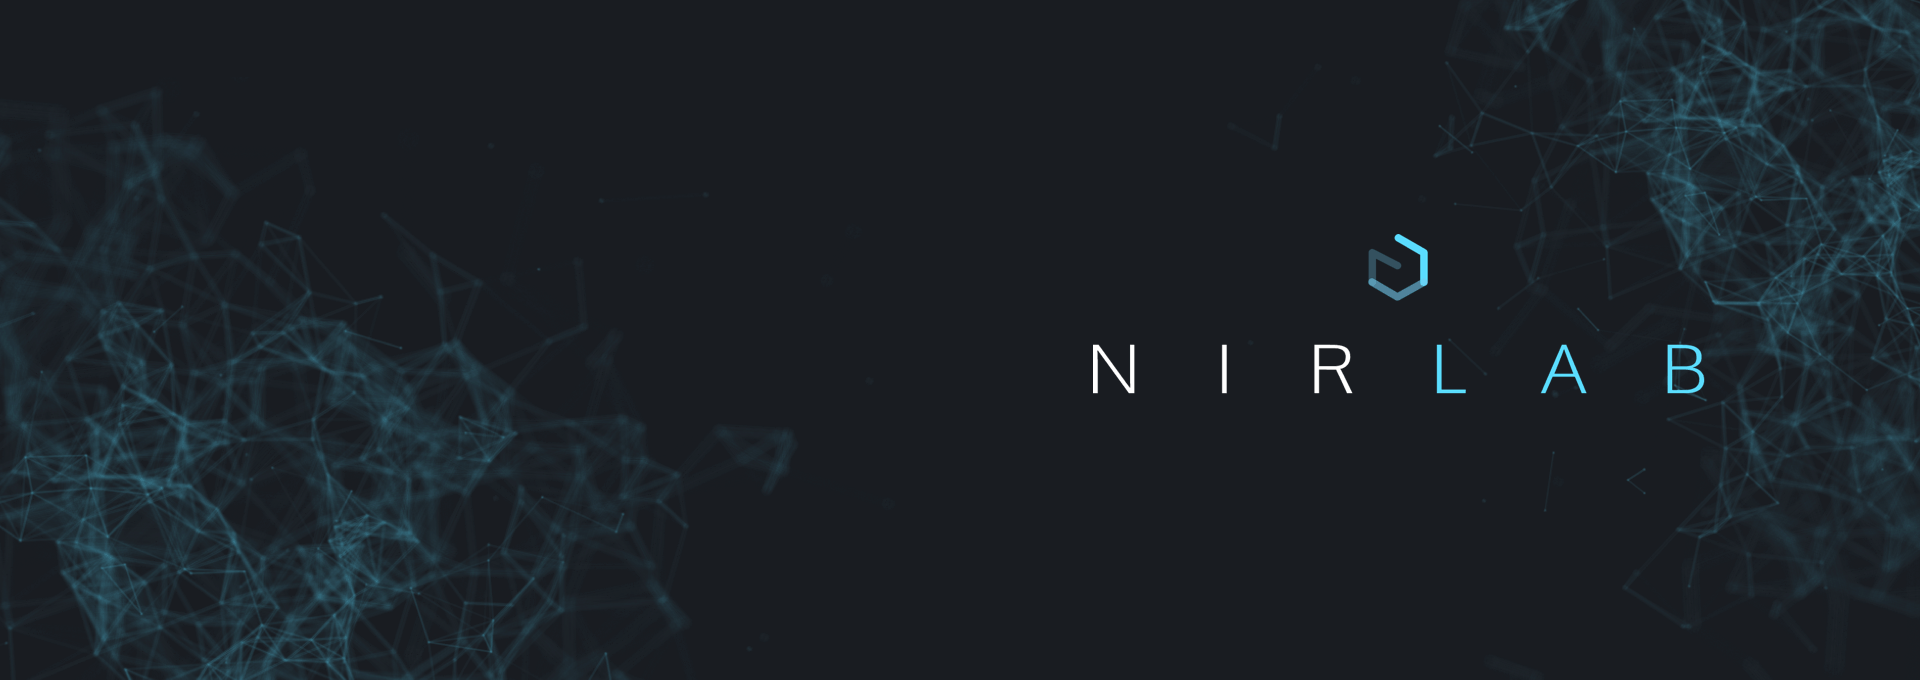 NIRLAB - Future is now